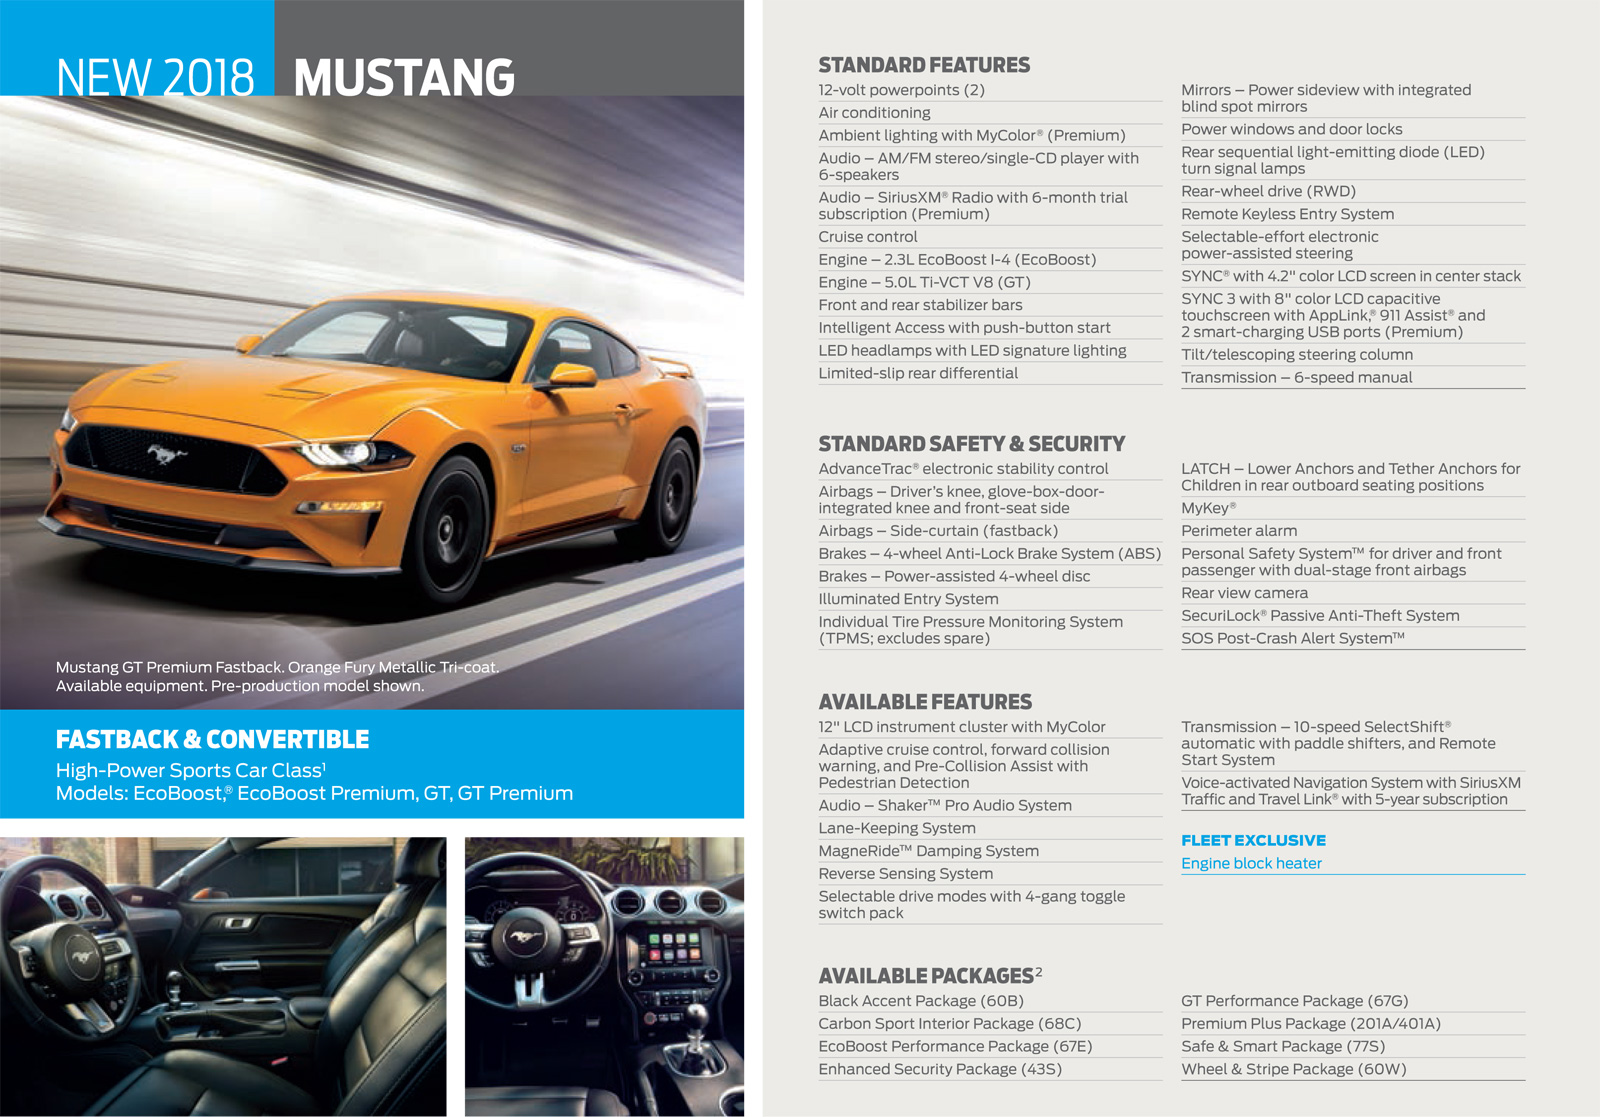 2018 Mustang Features Leaked